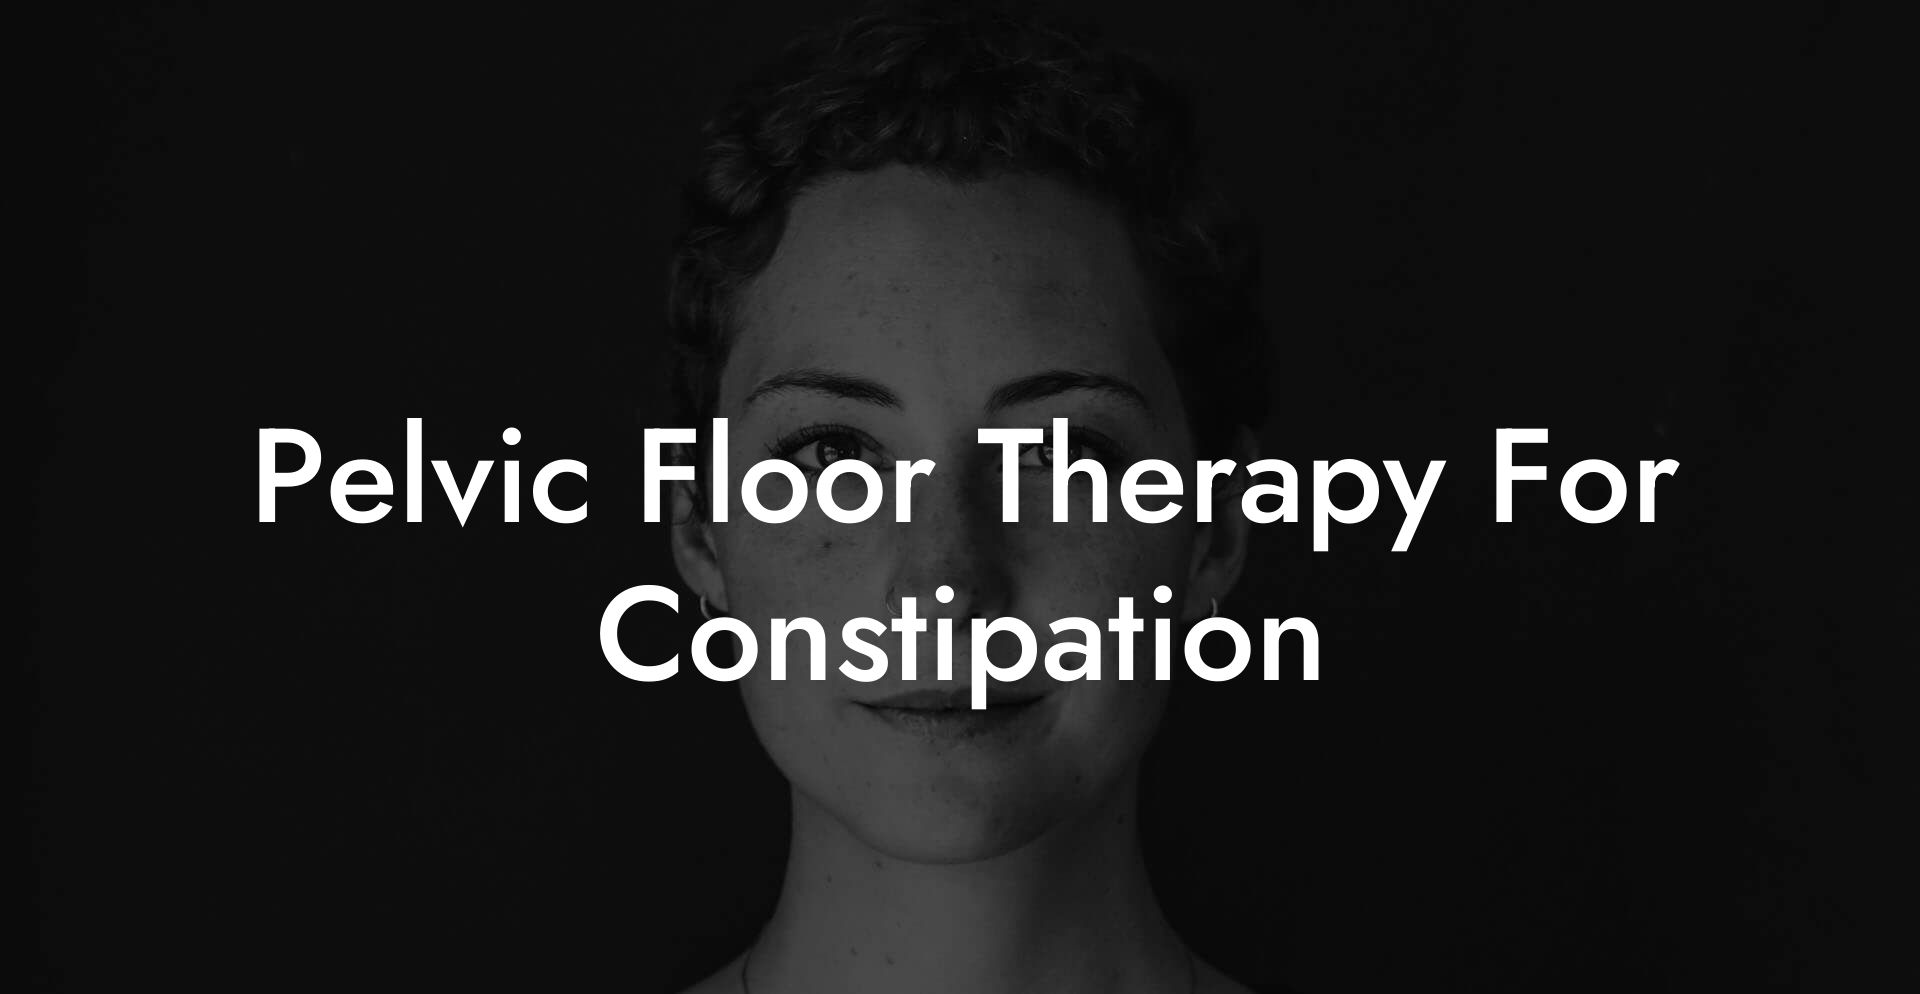 Pelvic Floor Therapy For Constipation